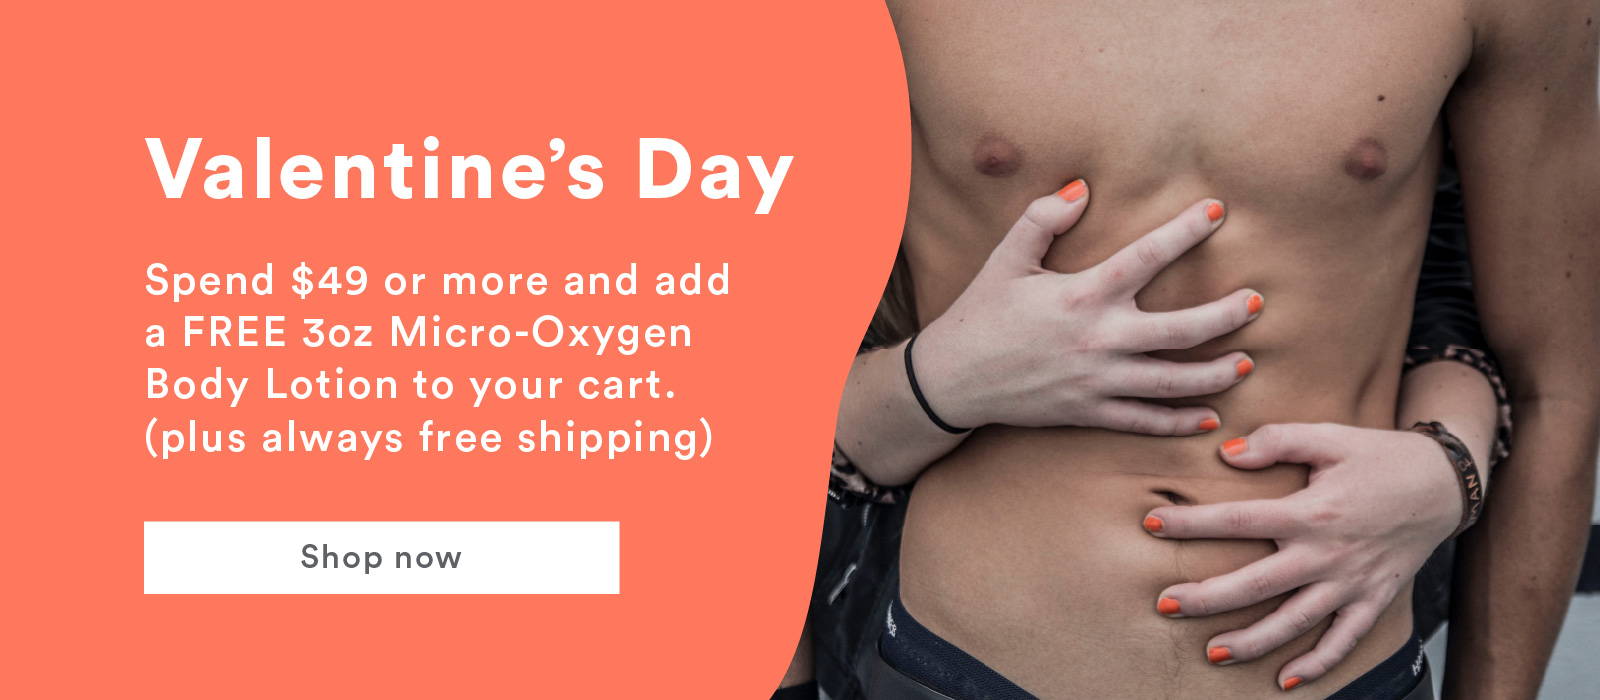 Valentines day sale! Spend $49, get a free body lotion